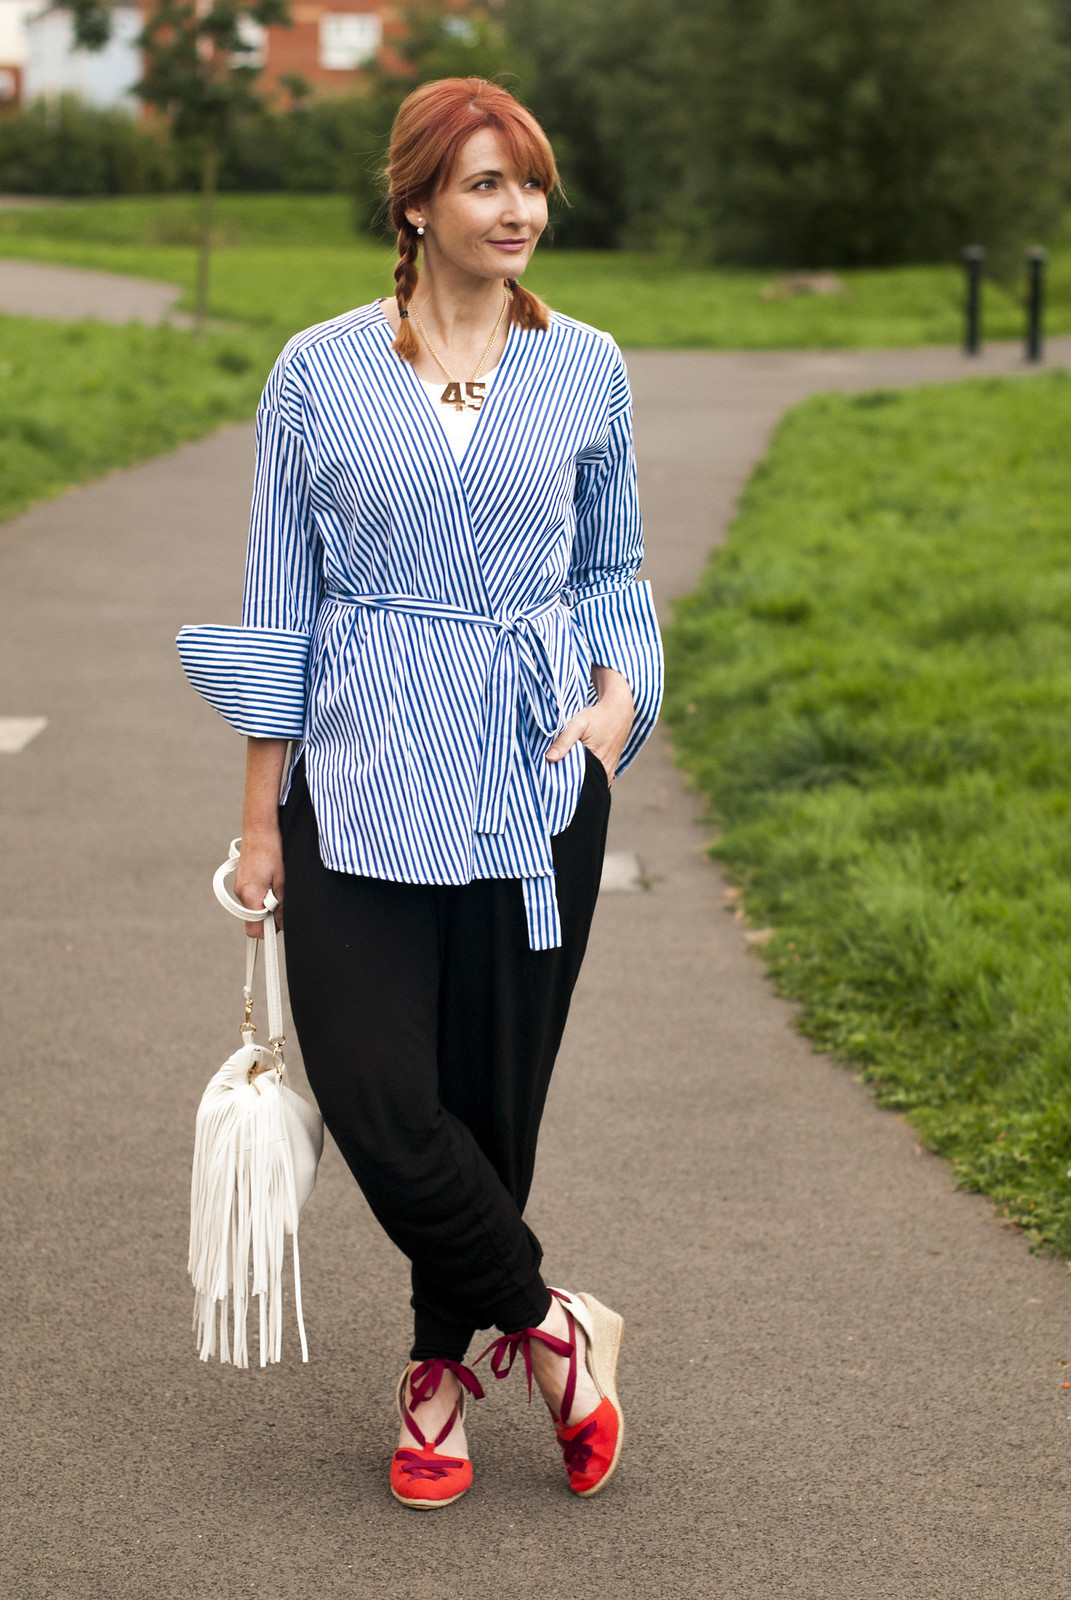 Brights basics for summer: Striped wrapover Mango blouse black harem pants gold 45 Asos necklace red wedge espadrilles white fringed crossbody bag | Not Dressed As Lamb, over 40 style